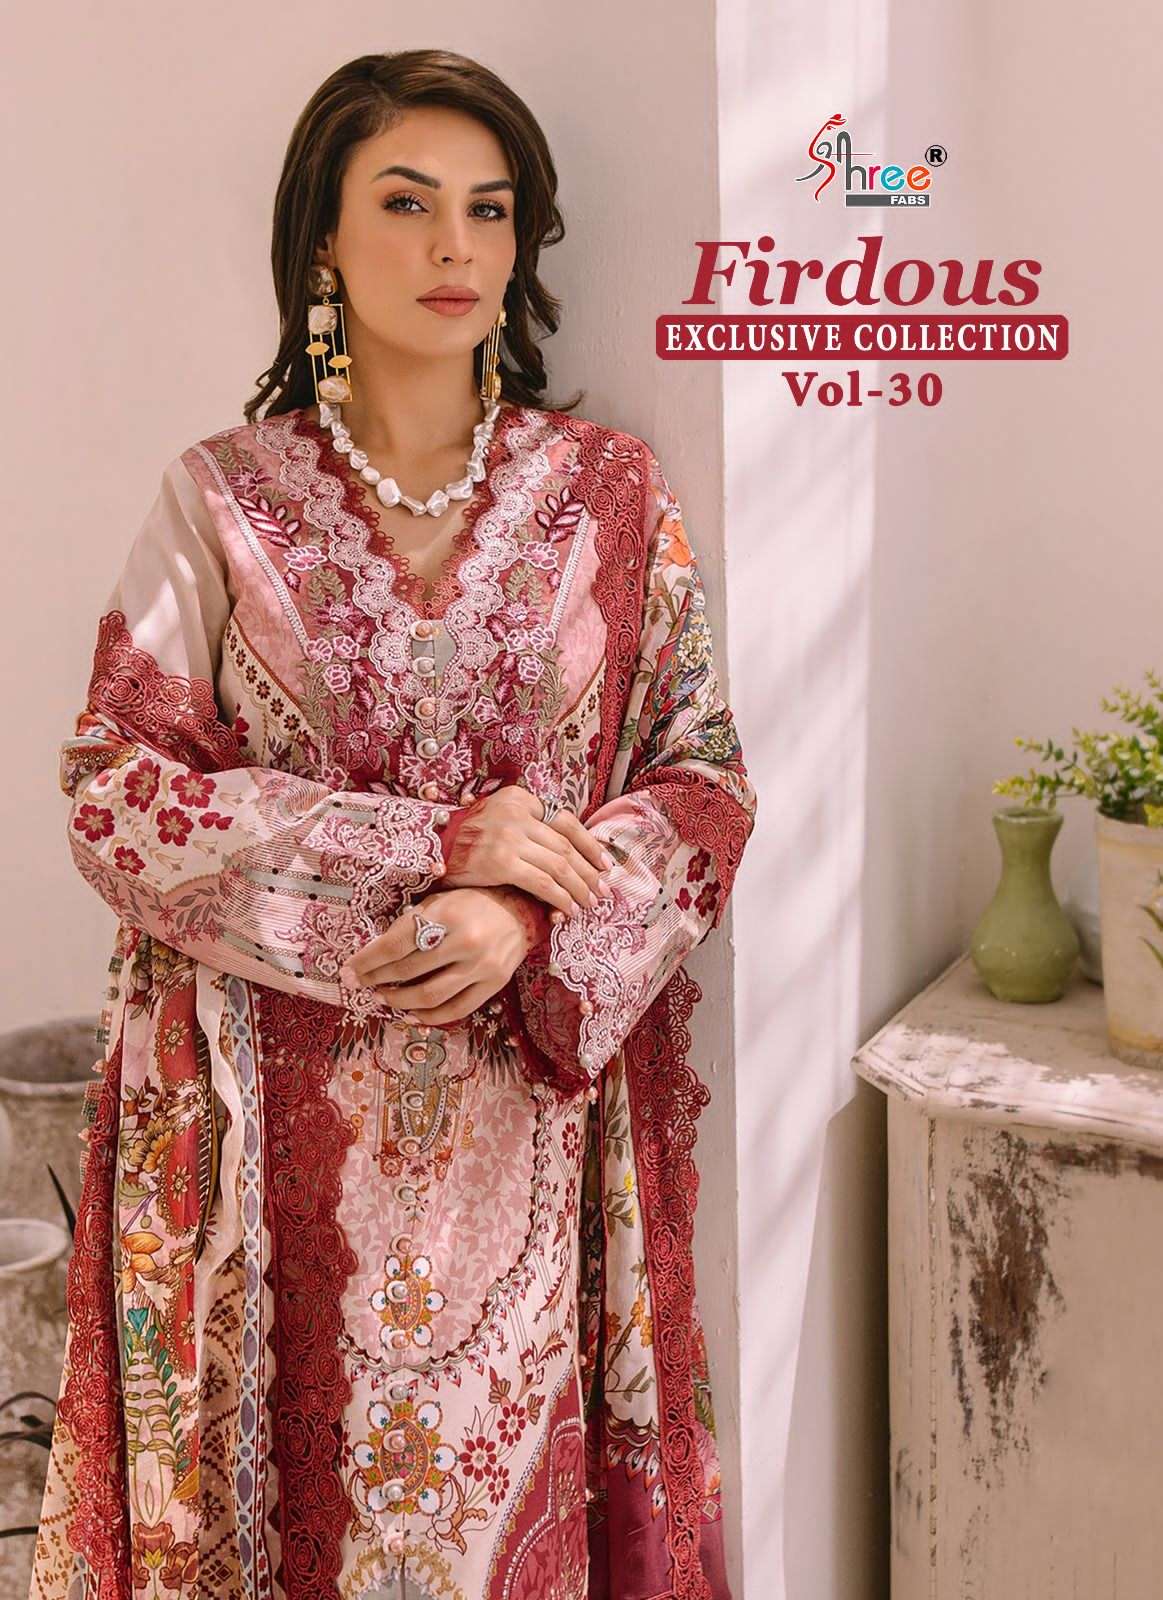 SHREE FAB FIRDOUS EXCLUSIVE COLLECTION VOL 30 DESIGNER COTTON PRINT WITH EMBROIDERY WORK HEAVY PAKISTANI REPLICA SUITS WHOLESALE 